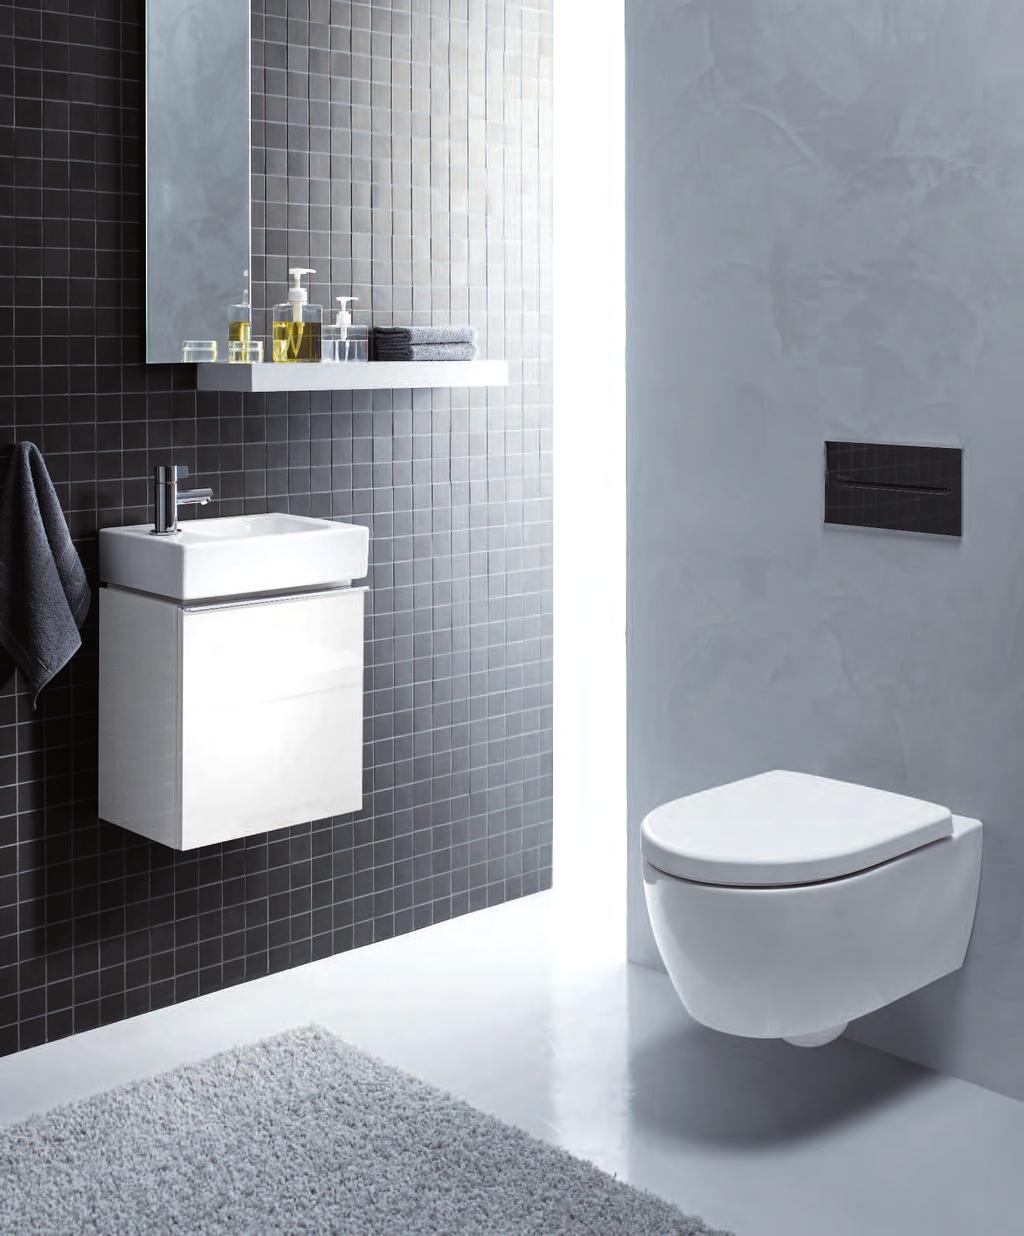 The Twyford Rimfree toilet is now available - wall hung & close coupled back-to-wall Twyford s revolutionary Rimfree technology is now available for all